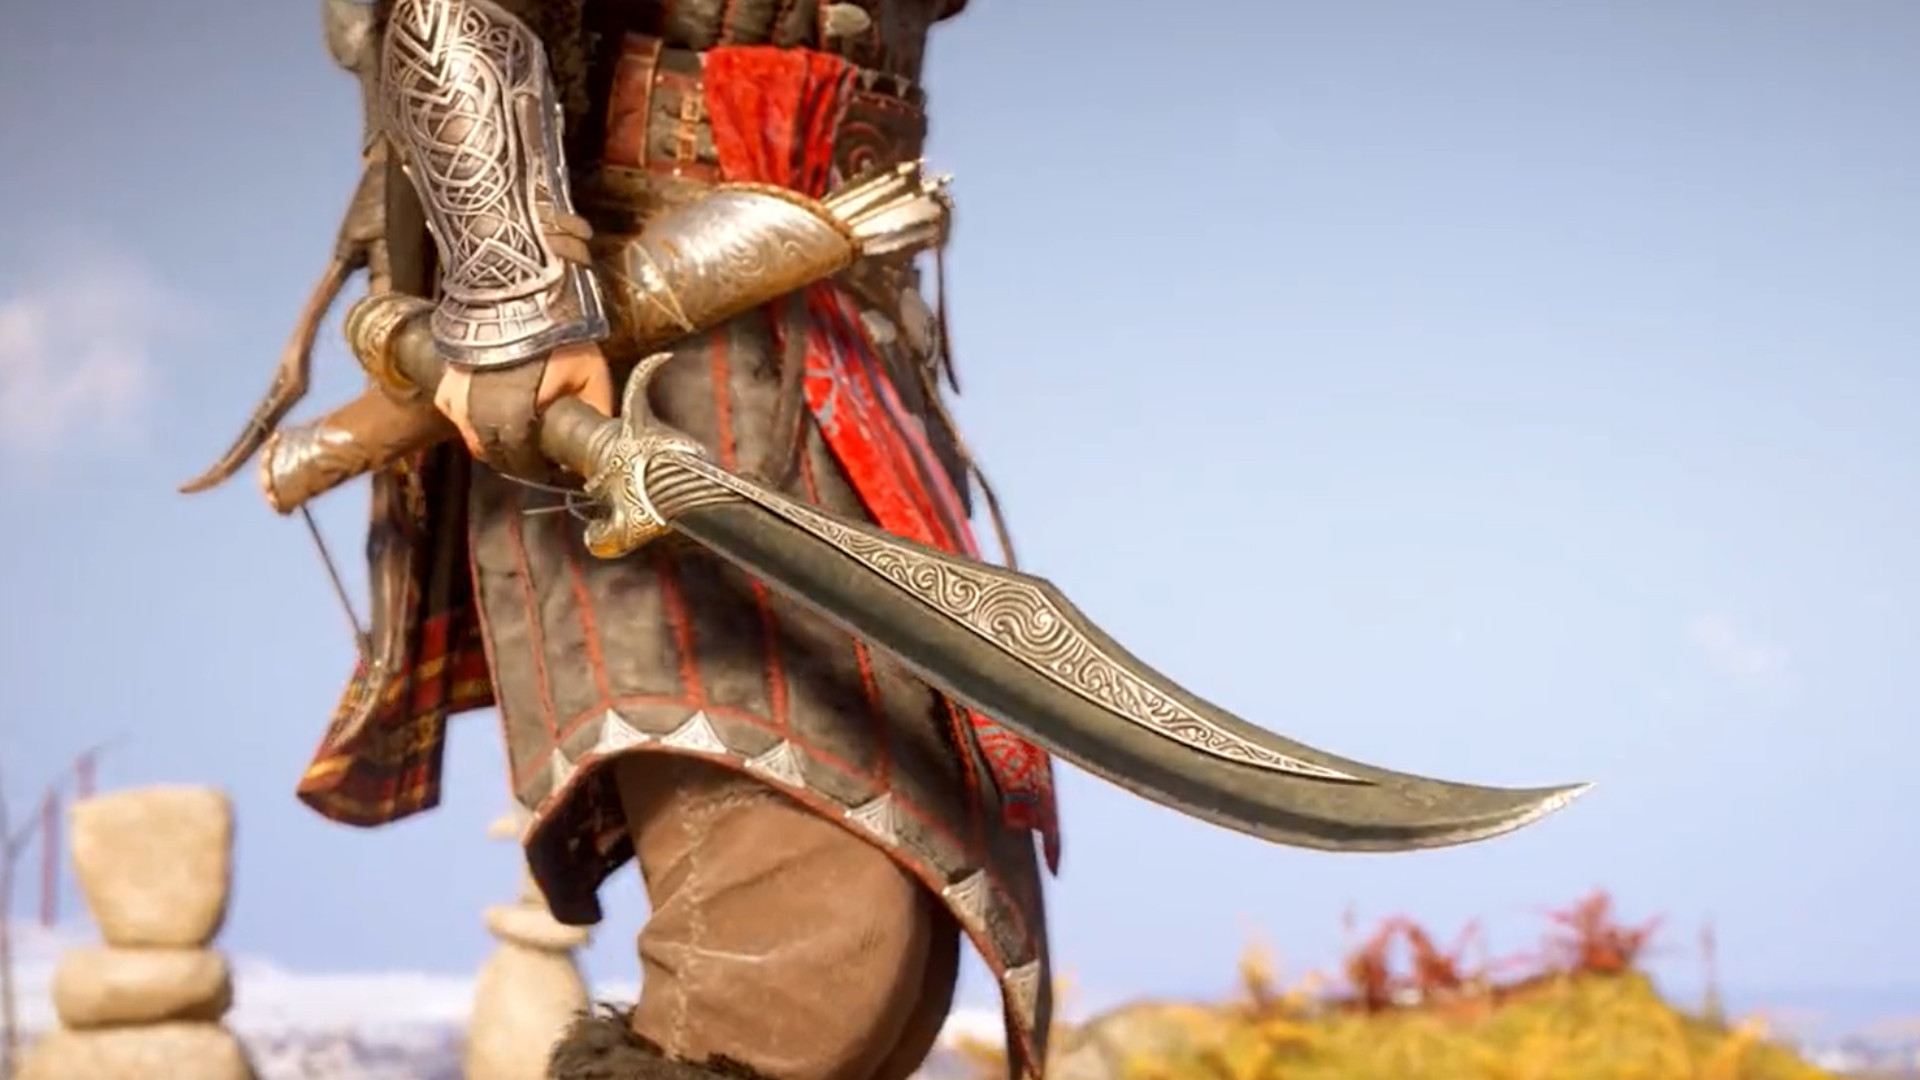 Assassin's Creed Valhalla adds Basim's sword, but you need to play this week to get it